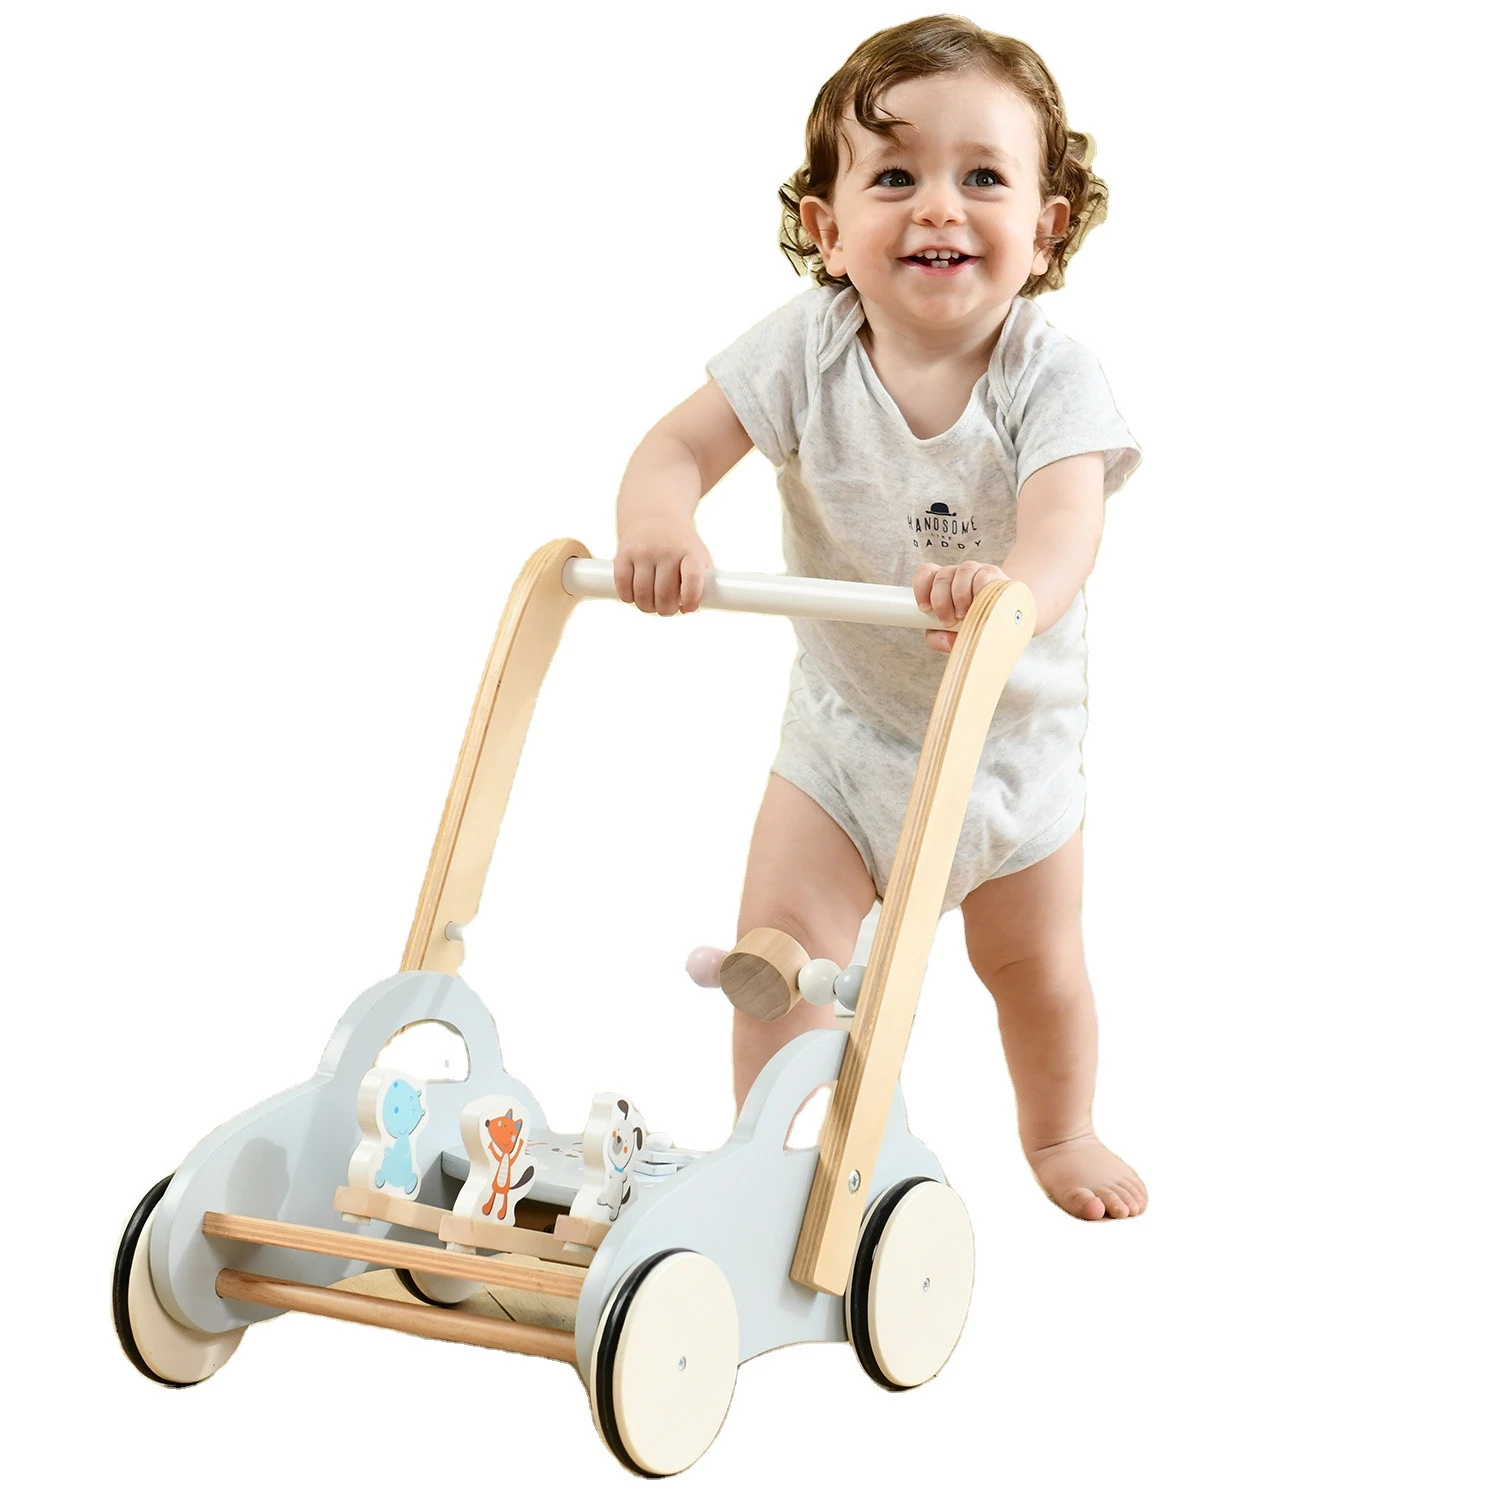 Odorless paint wooden kids baby stroller walker toys eco friendly toys wooden toy baby walker for baby boy